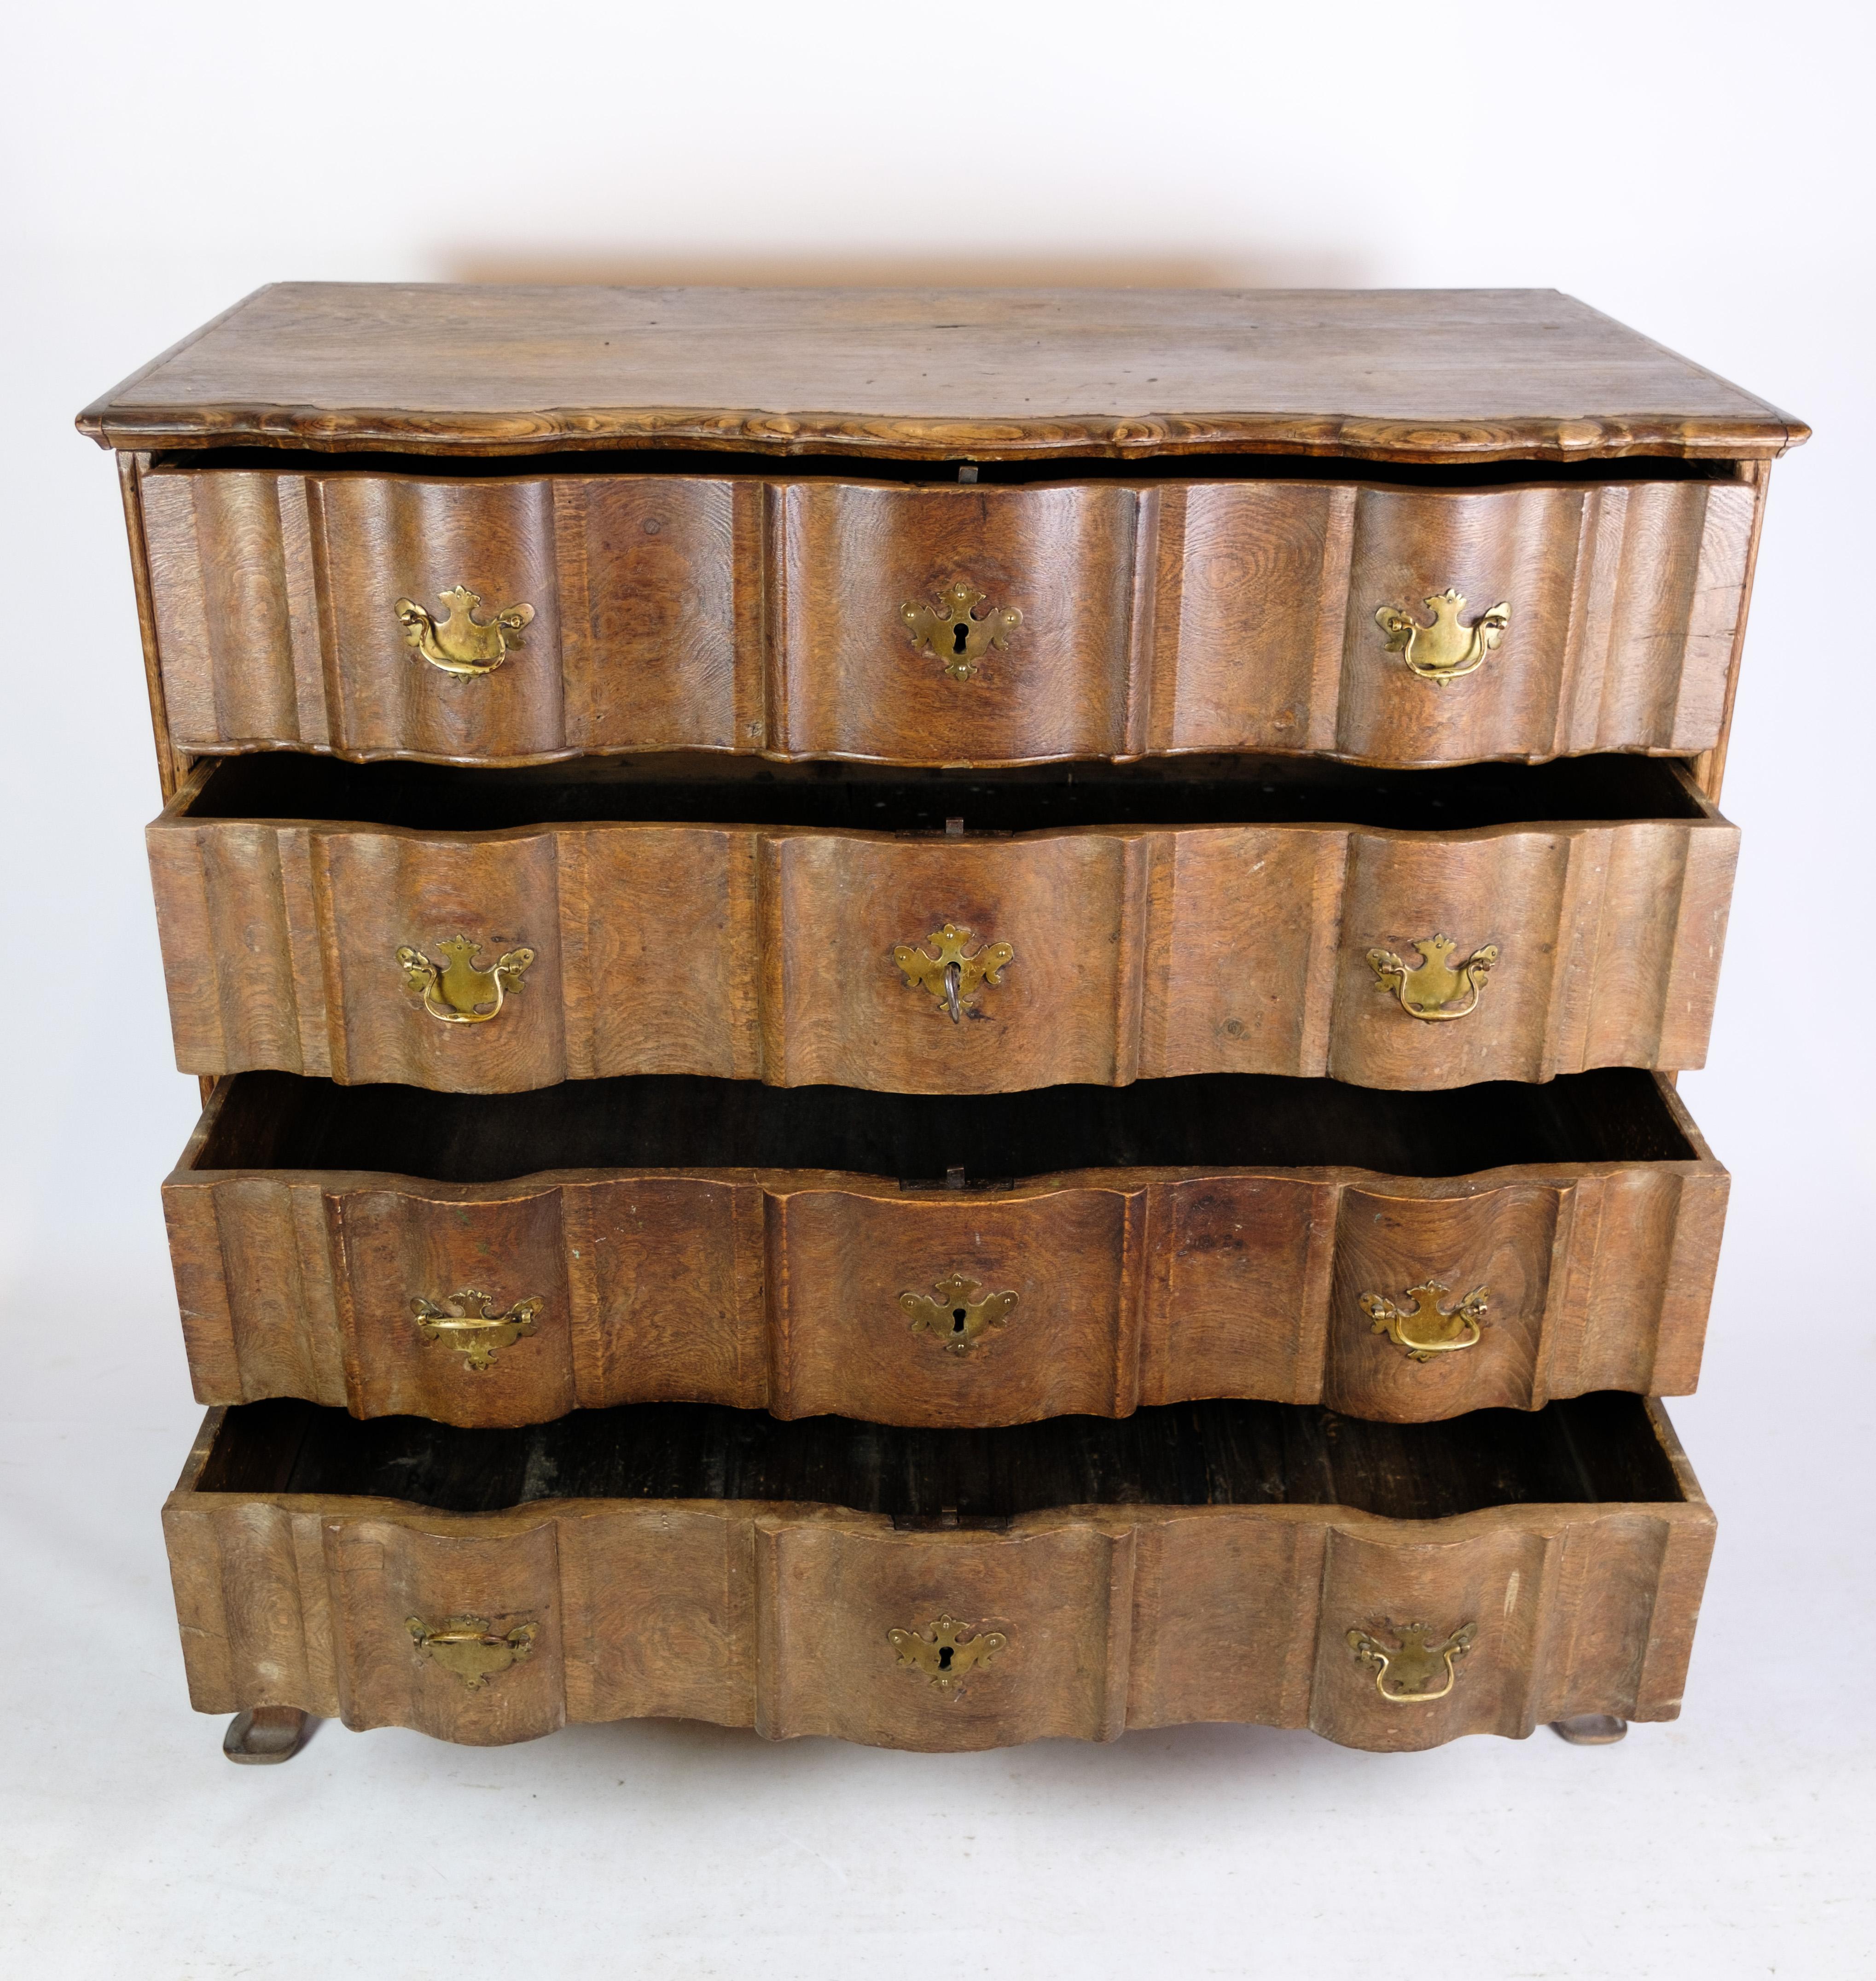 Baroque chest of drawers in oak with brass fittings decorated with wood carvings from the period around the 1780s.
Dimensions in cm: H:110 W:115 D:60